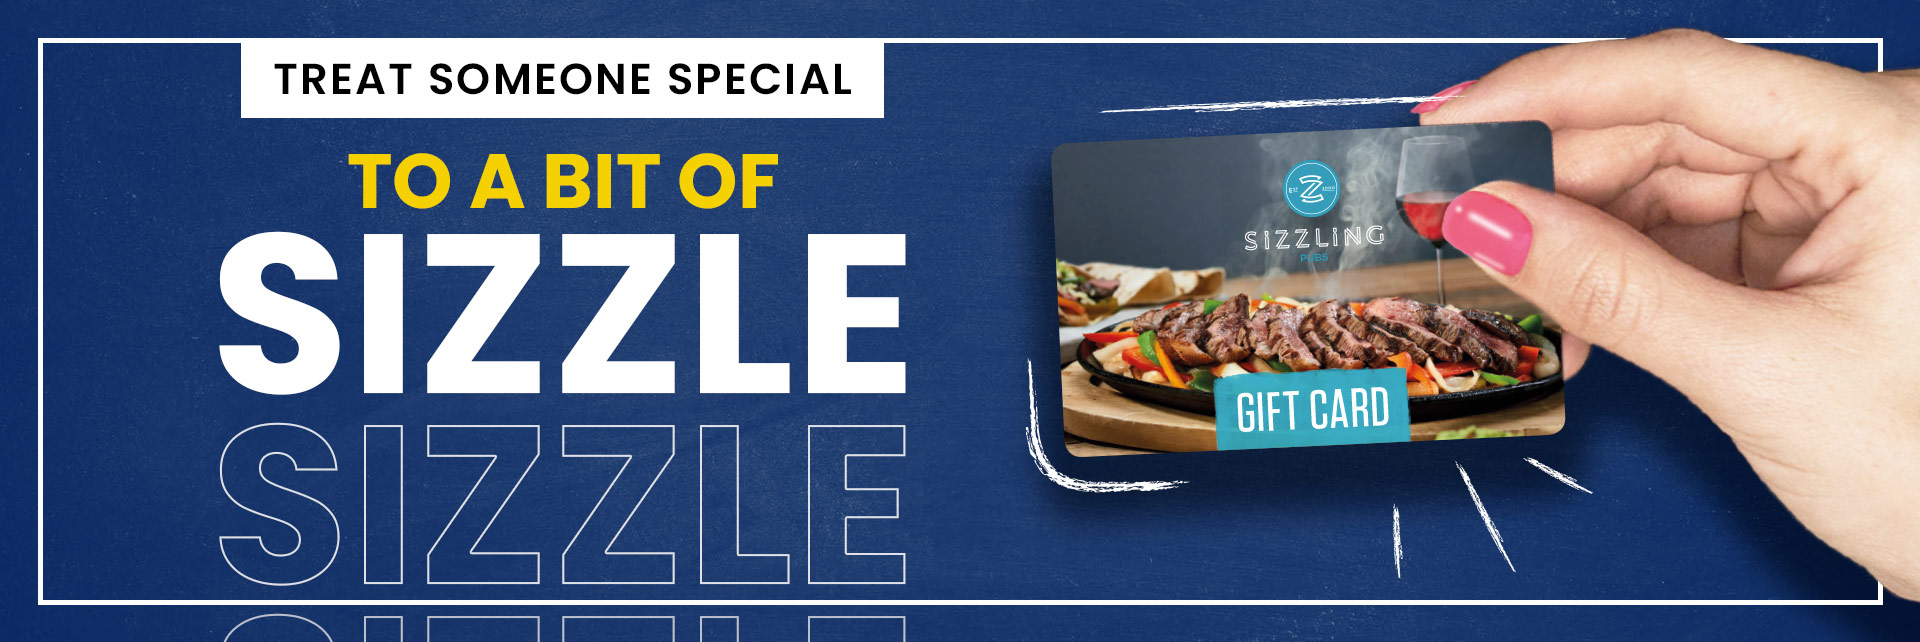 Sizzling Pubs Gift Card at The Newton Arms in Blackpool